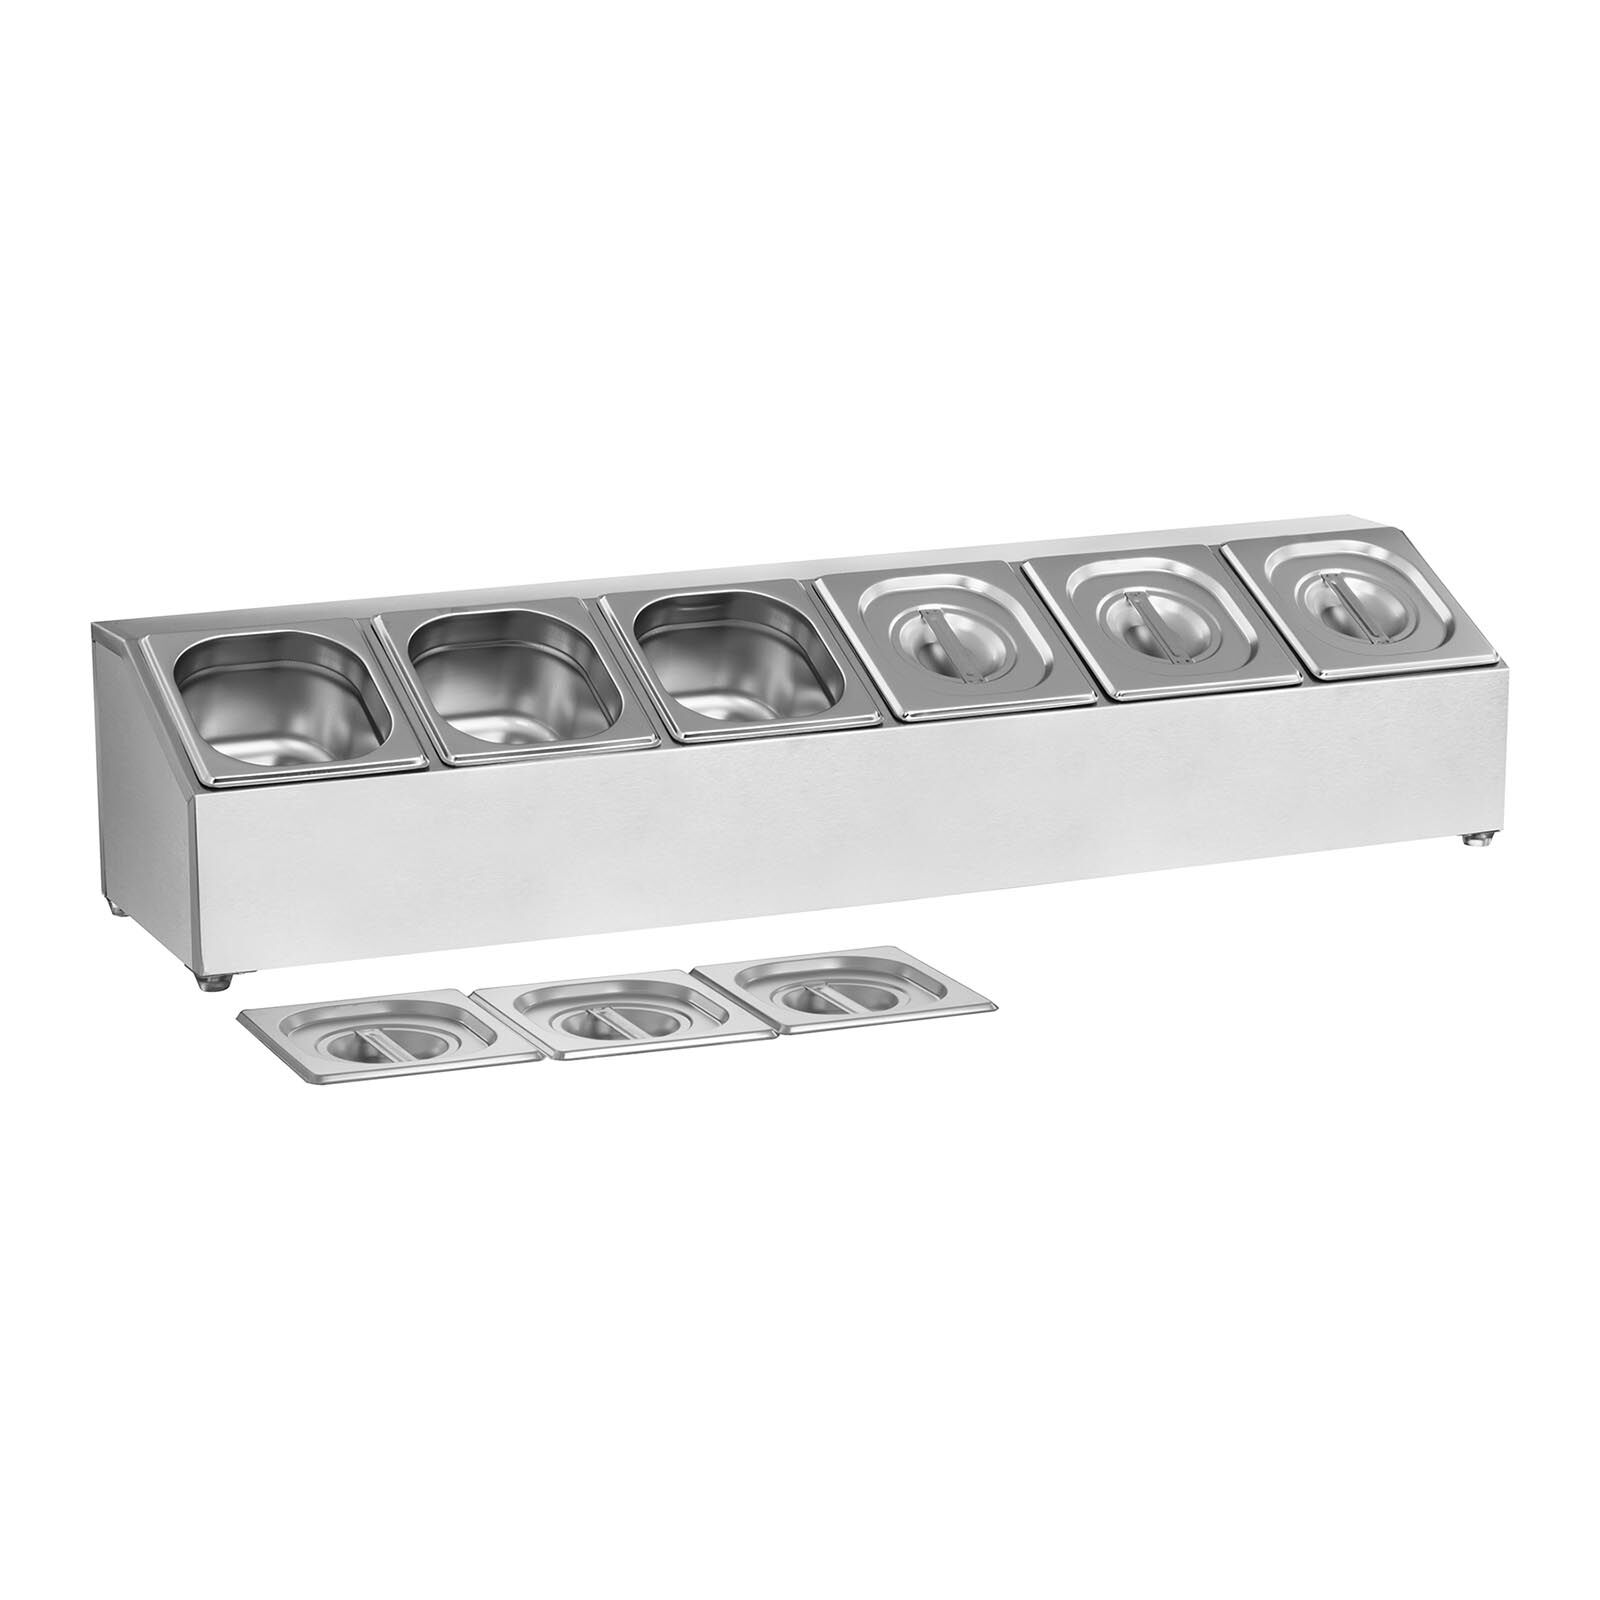 Royal Catering GN-containerhouder - incl. 6 GN 1/6 containers met deksel 10011013